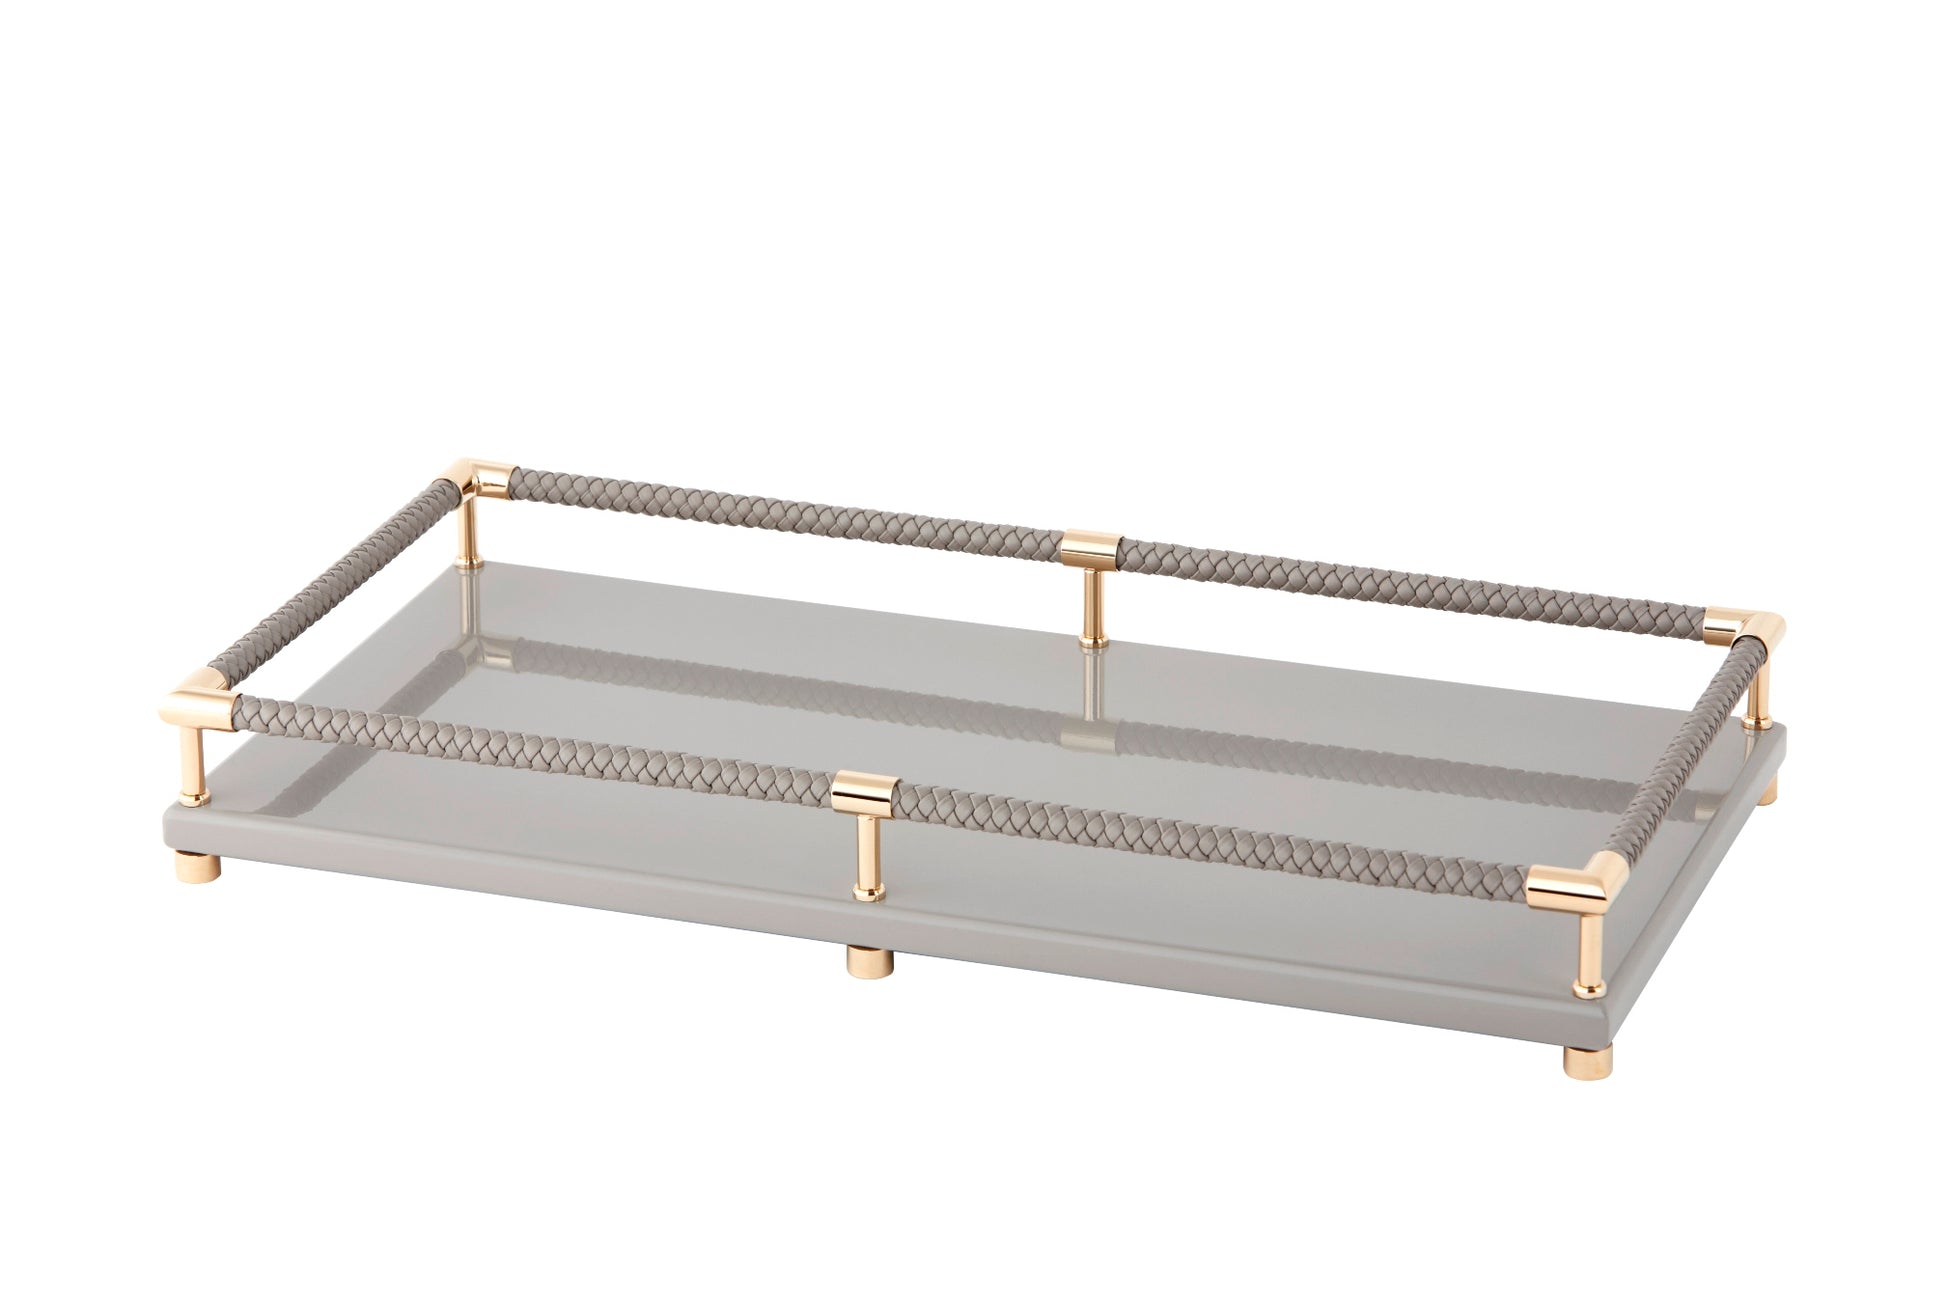 Riviere Thea Lacquered Wood Tray with Braided Leather Railing | Rectangular Vanity Tray | Lacquered Wood Base | Braided Leather Railing | Chrome or Gold Details | Perfect for Vanity Organization | Explore Luxury Home Accessories at 2Jour Concierge, #1 luxury high-end gift & lifestyle shop